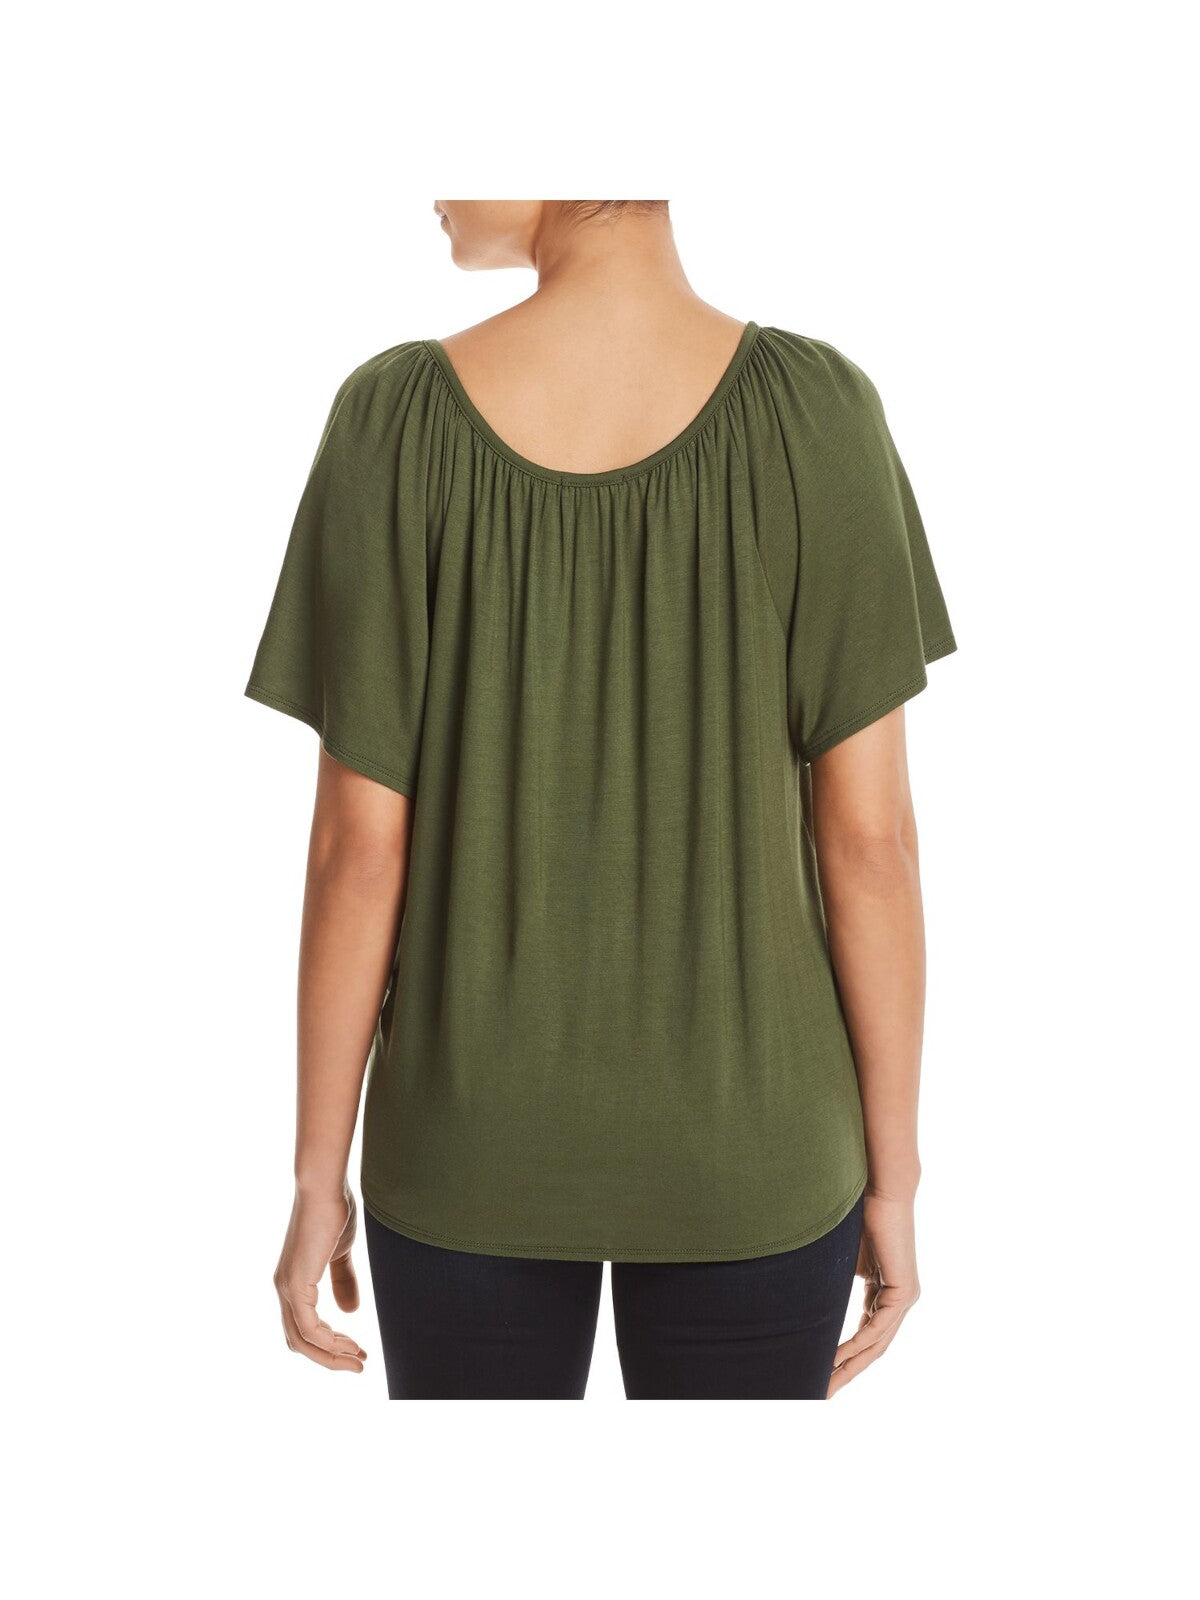 K & C Womens Green Stretch Ribbed Tie Button Down Short Sleeve Scoop Neck Blouse L